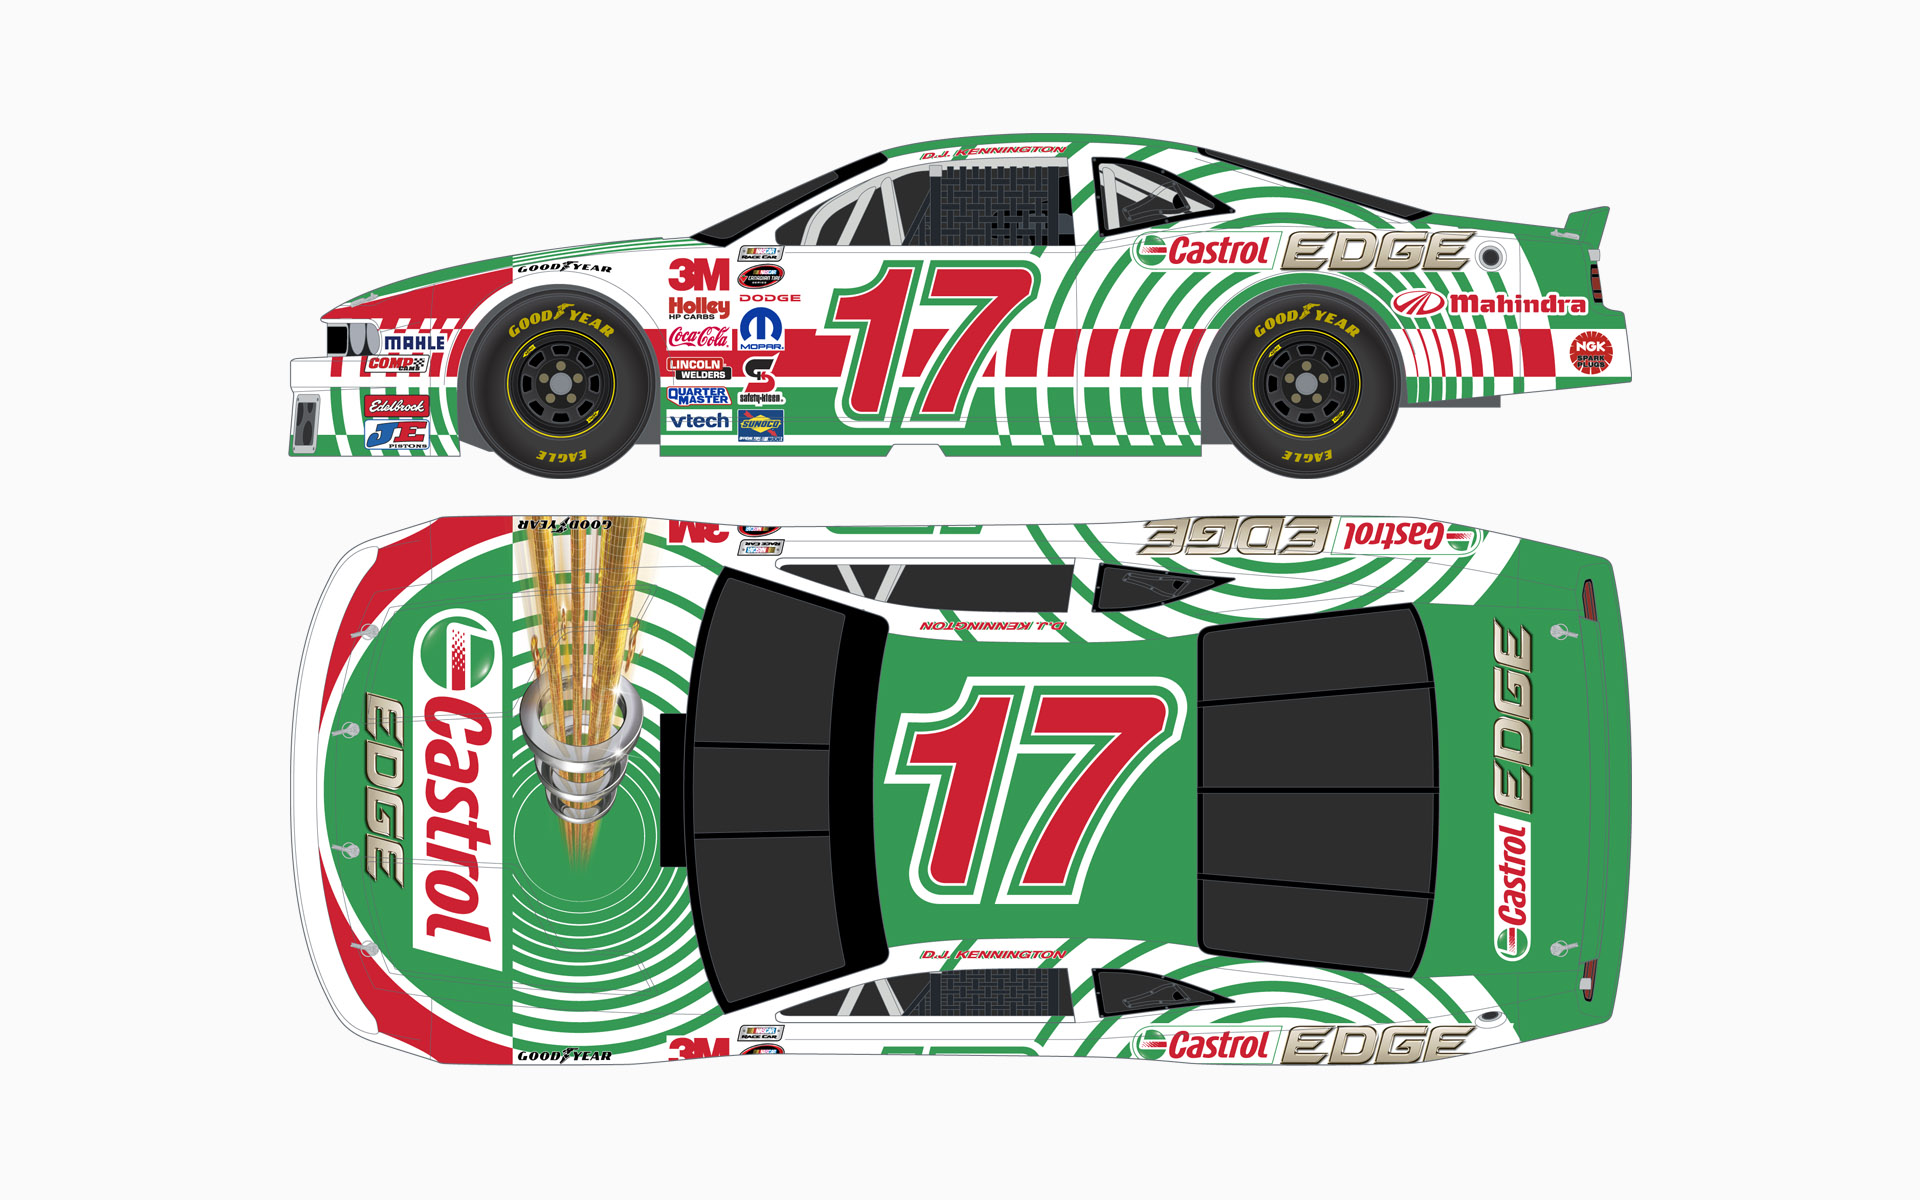 Wakefield Canada Castrol Edge Dodge Challenger NASCAR Canadian Tire Series Livery Elevations